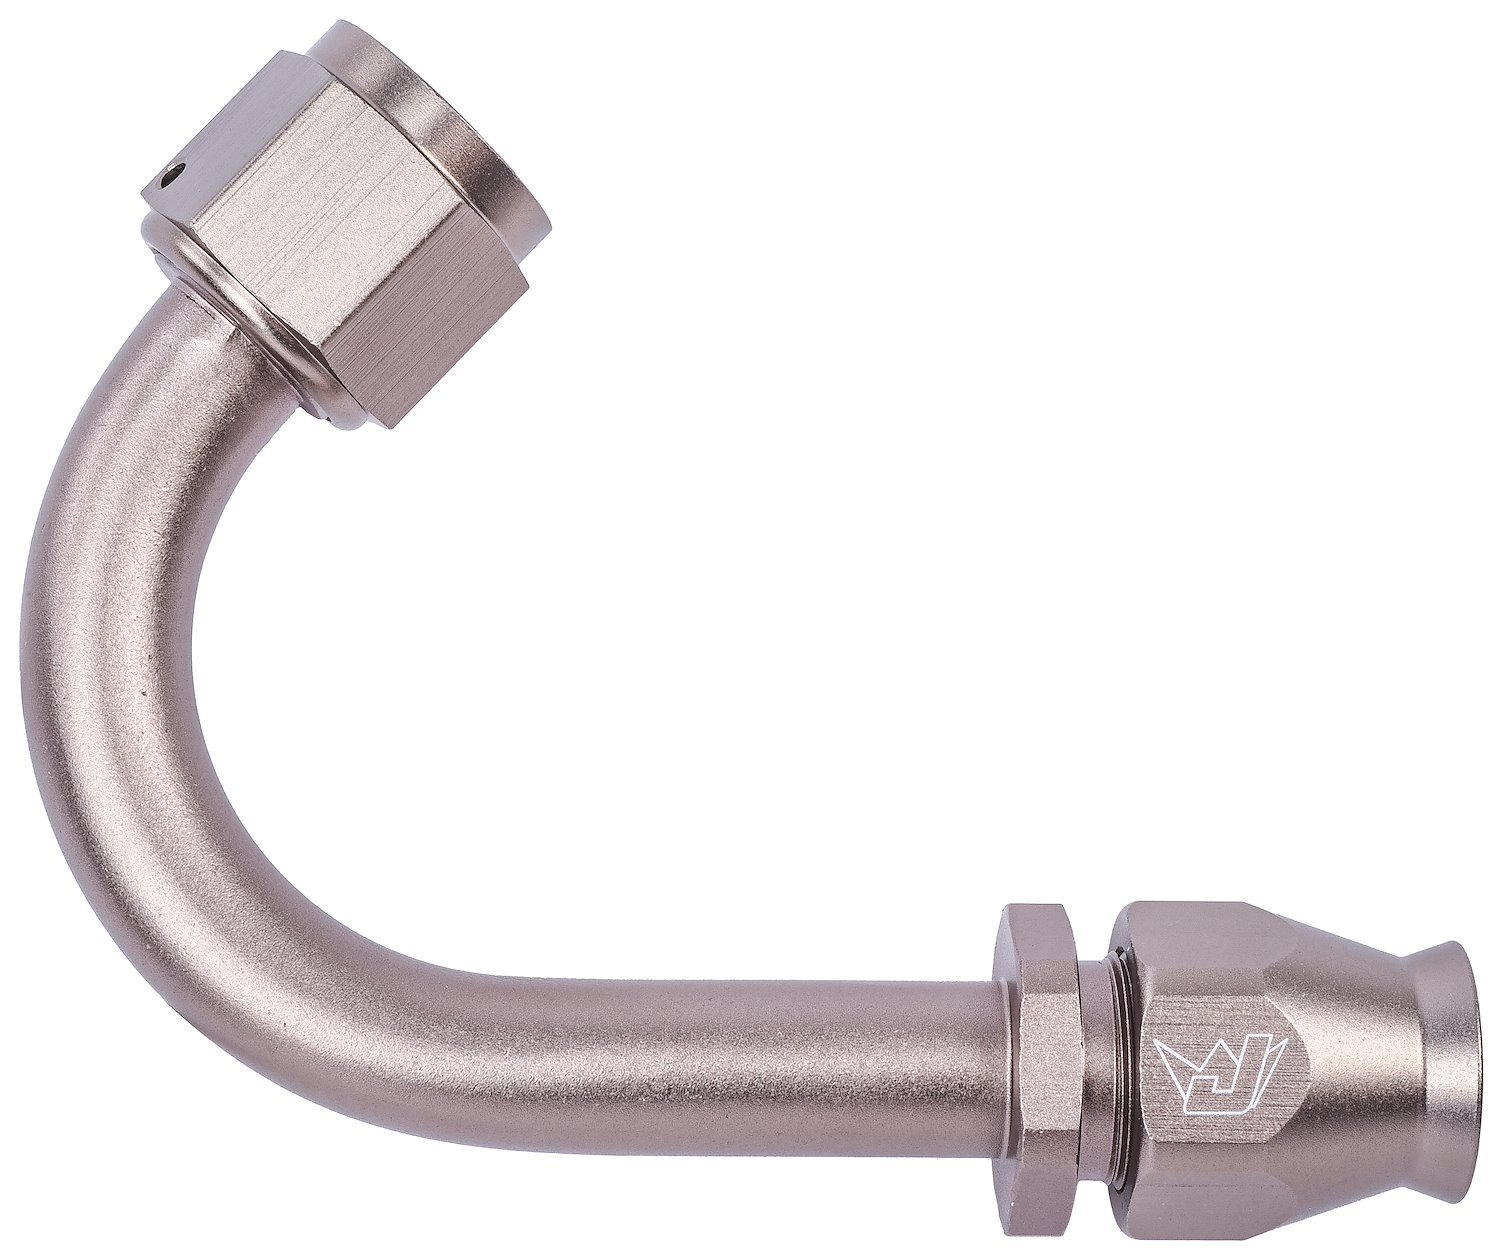 AN 135-Degree  A/C PTFE Hose End Fitting [-8 AN Female w/O-ring to -8 AN PTFE Hose, Champagne Anodized Aluminum]